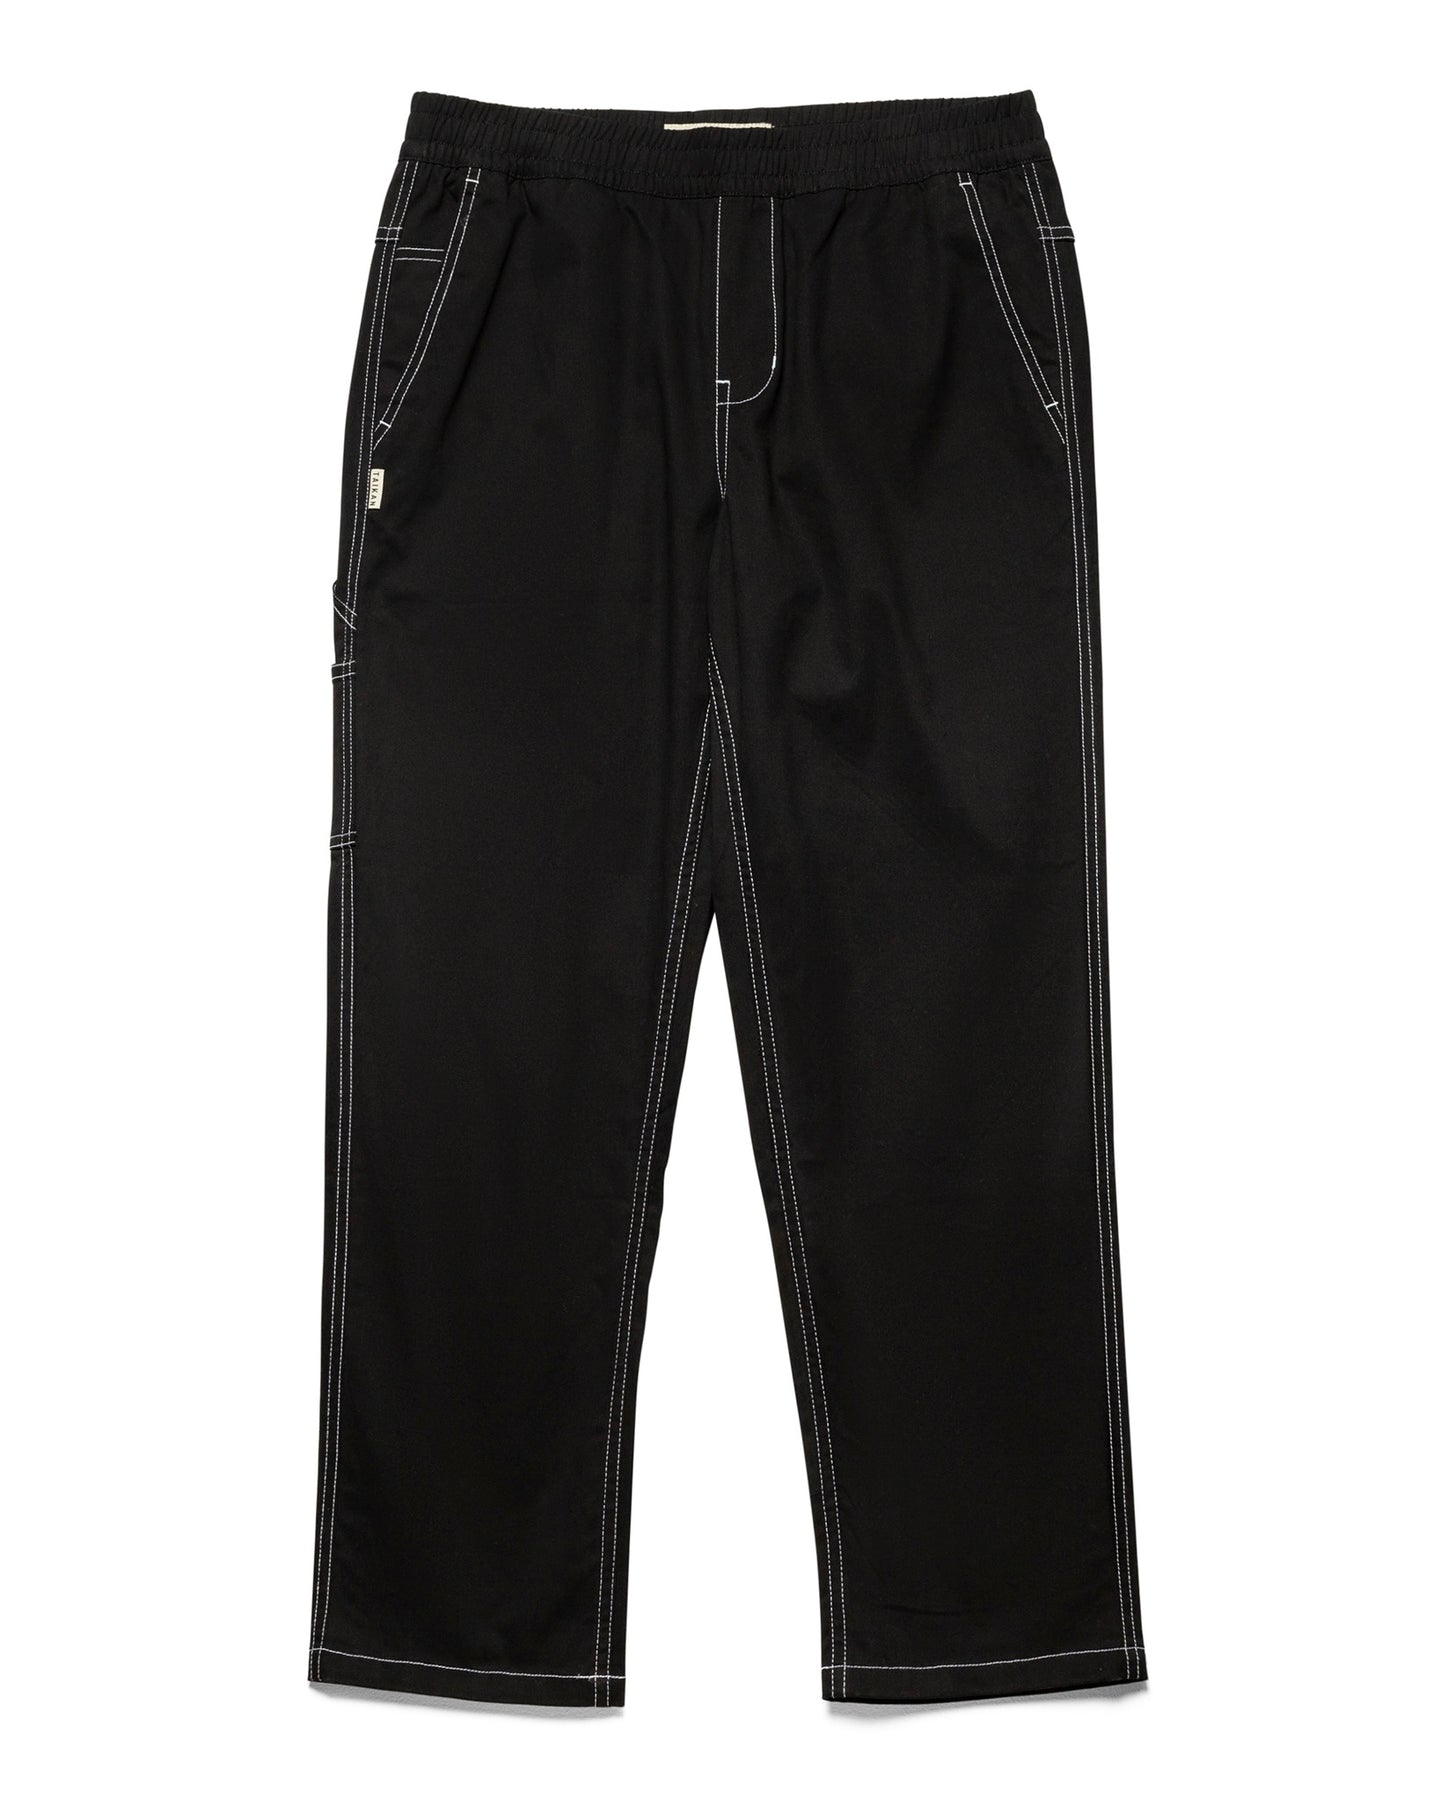 the Taikan Carpenter Pant in Black Contrast laying flat on a white background